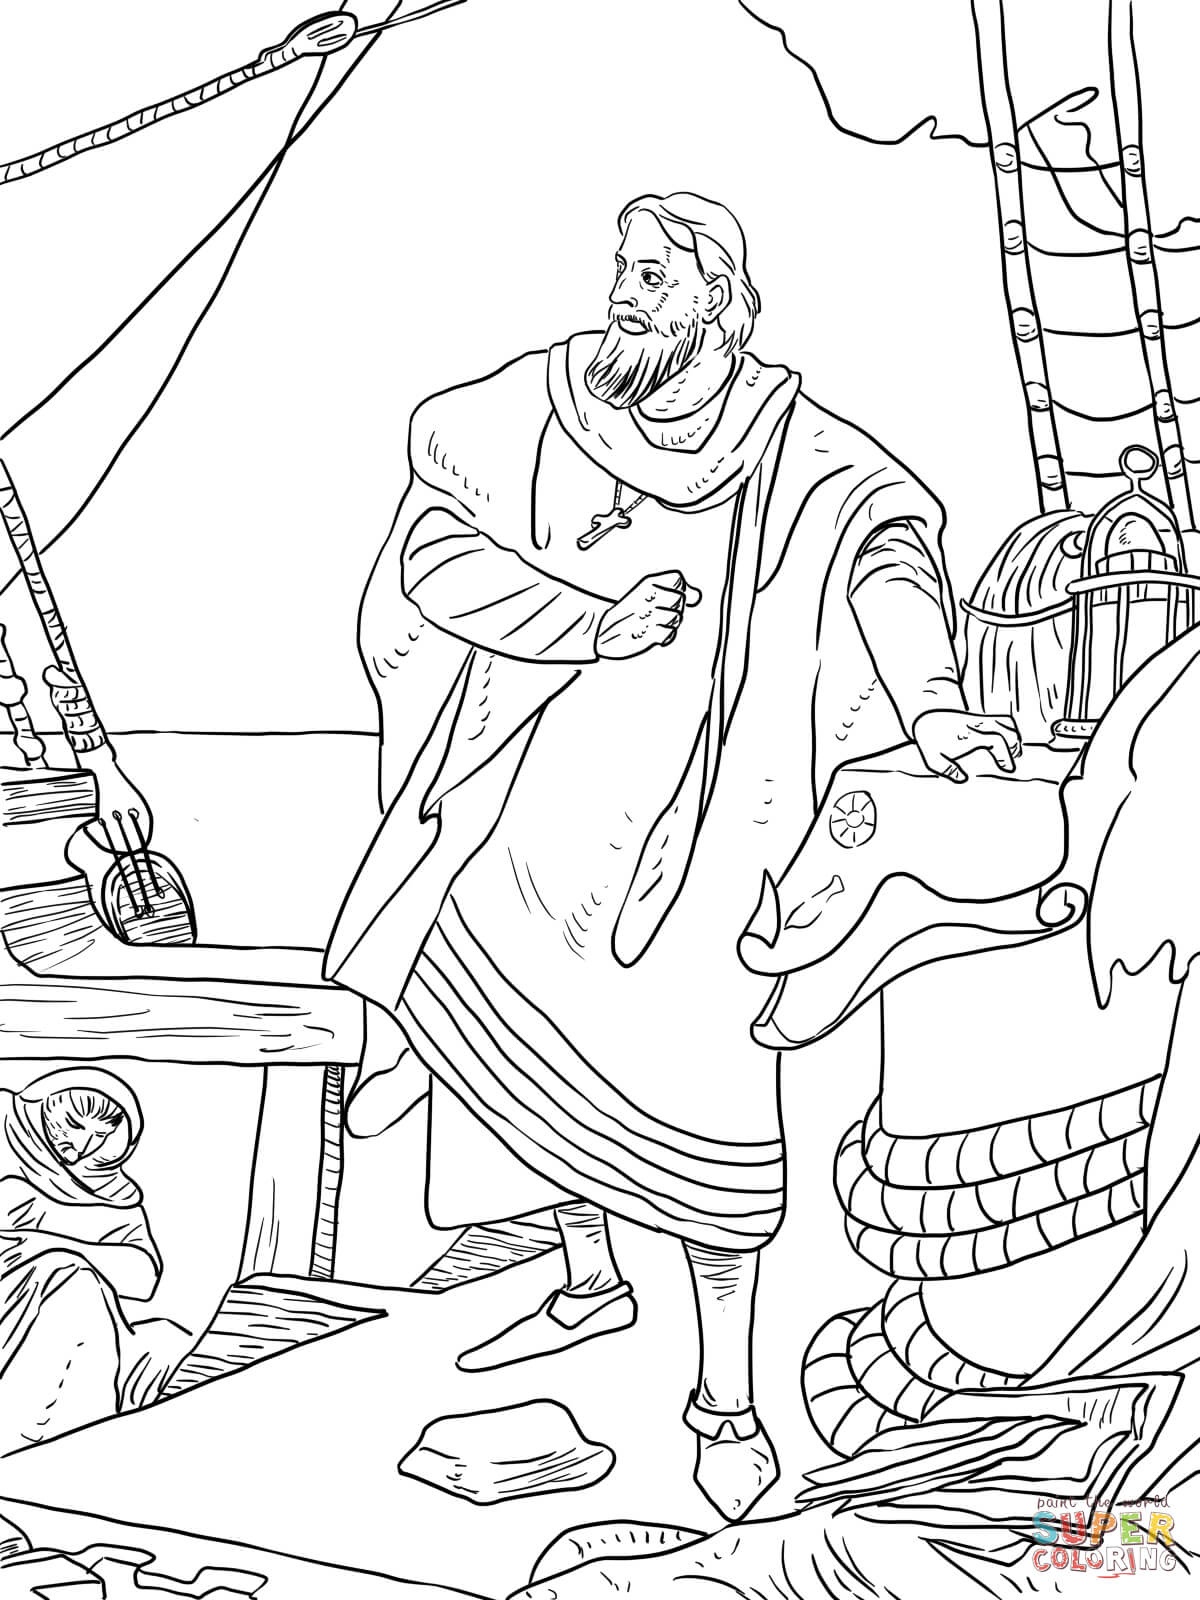 Christopher Columbus On The Santa Maria Coloring Page | Free - Free Printable Christopher Columbus Coloring Pages